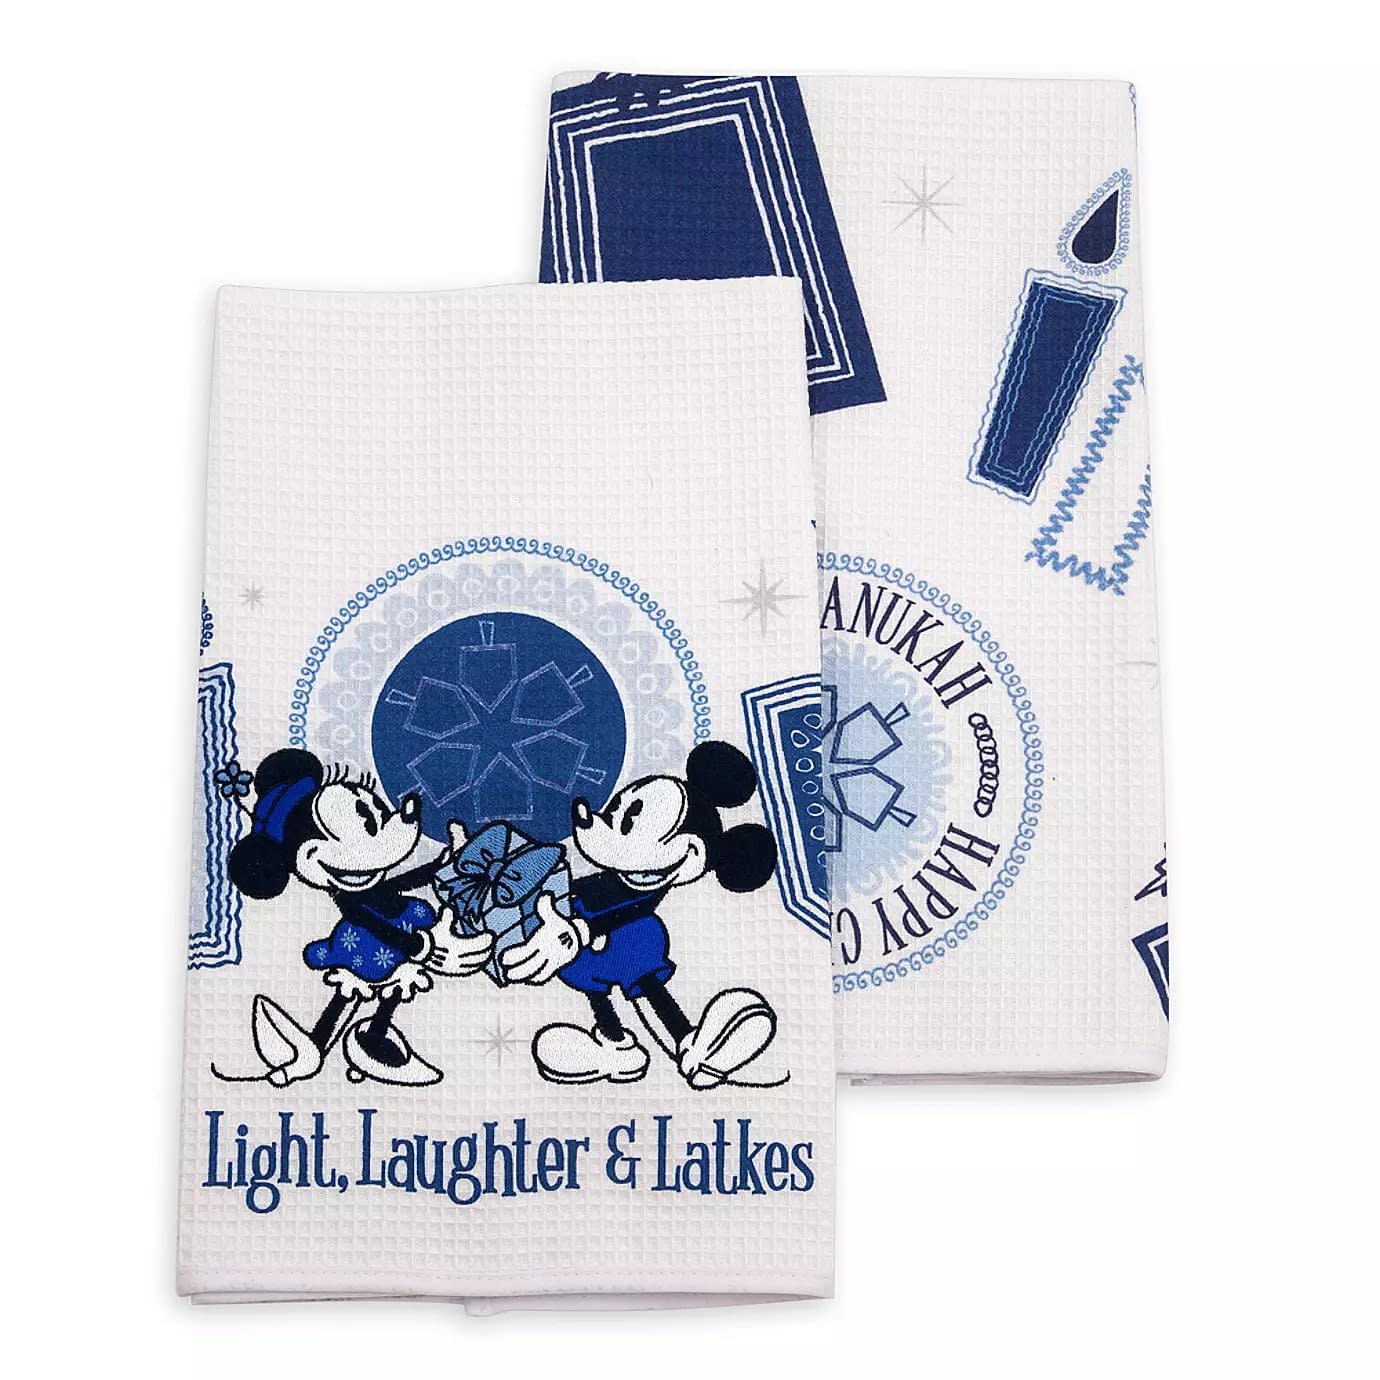 9 Disney Park Items to Add to Your Holiday Shopping List